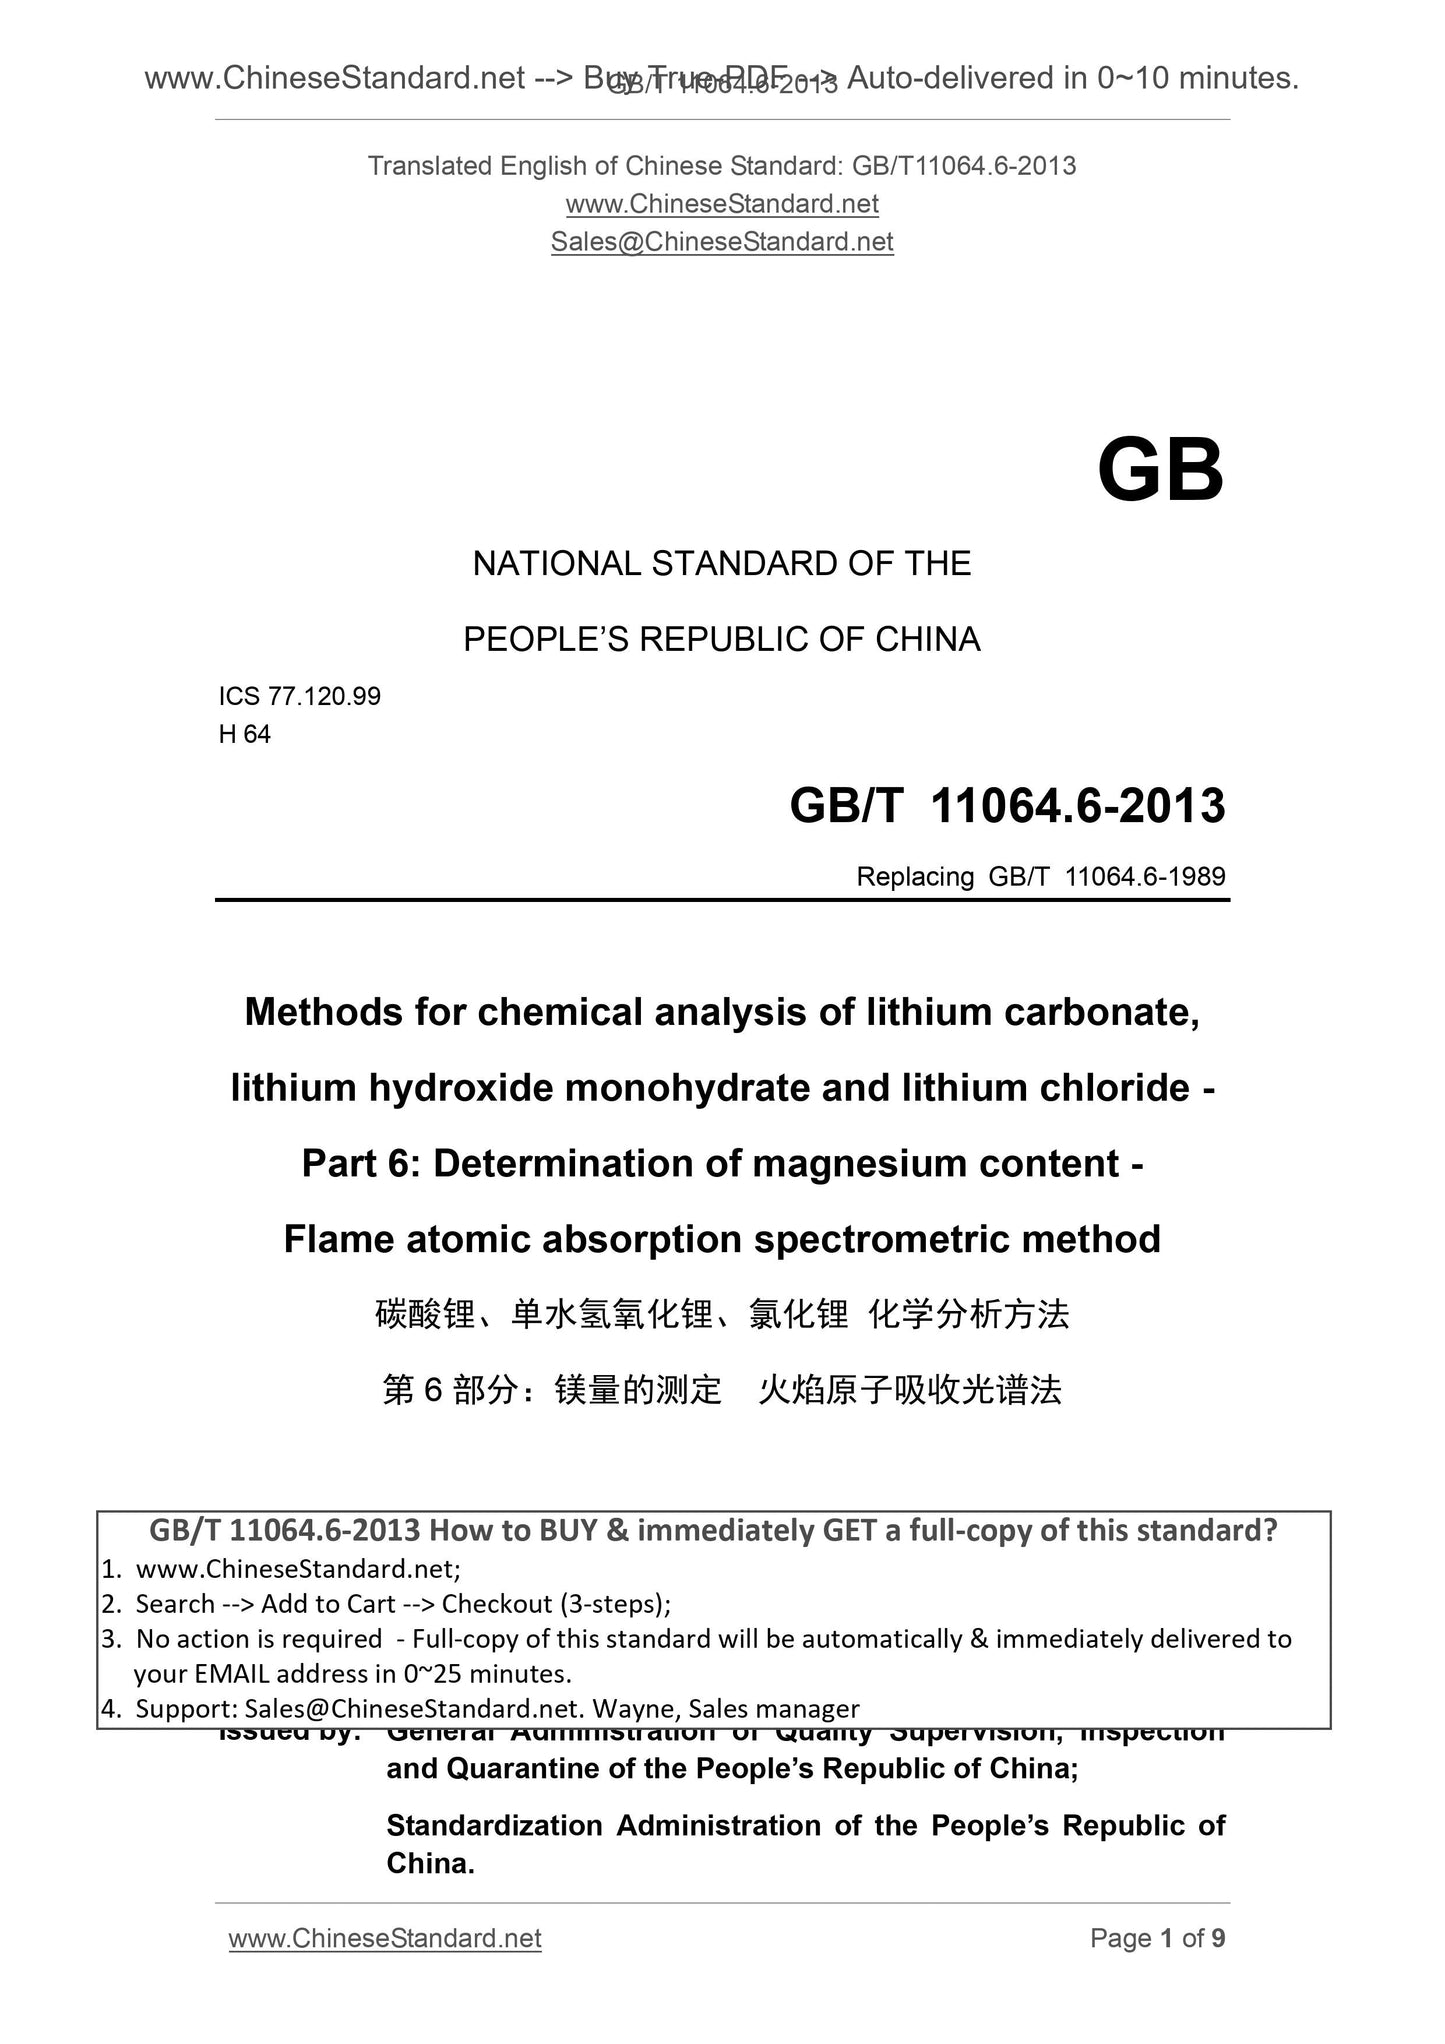 GB/T 11064.6-2013 Page 1